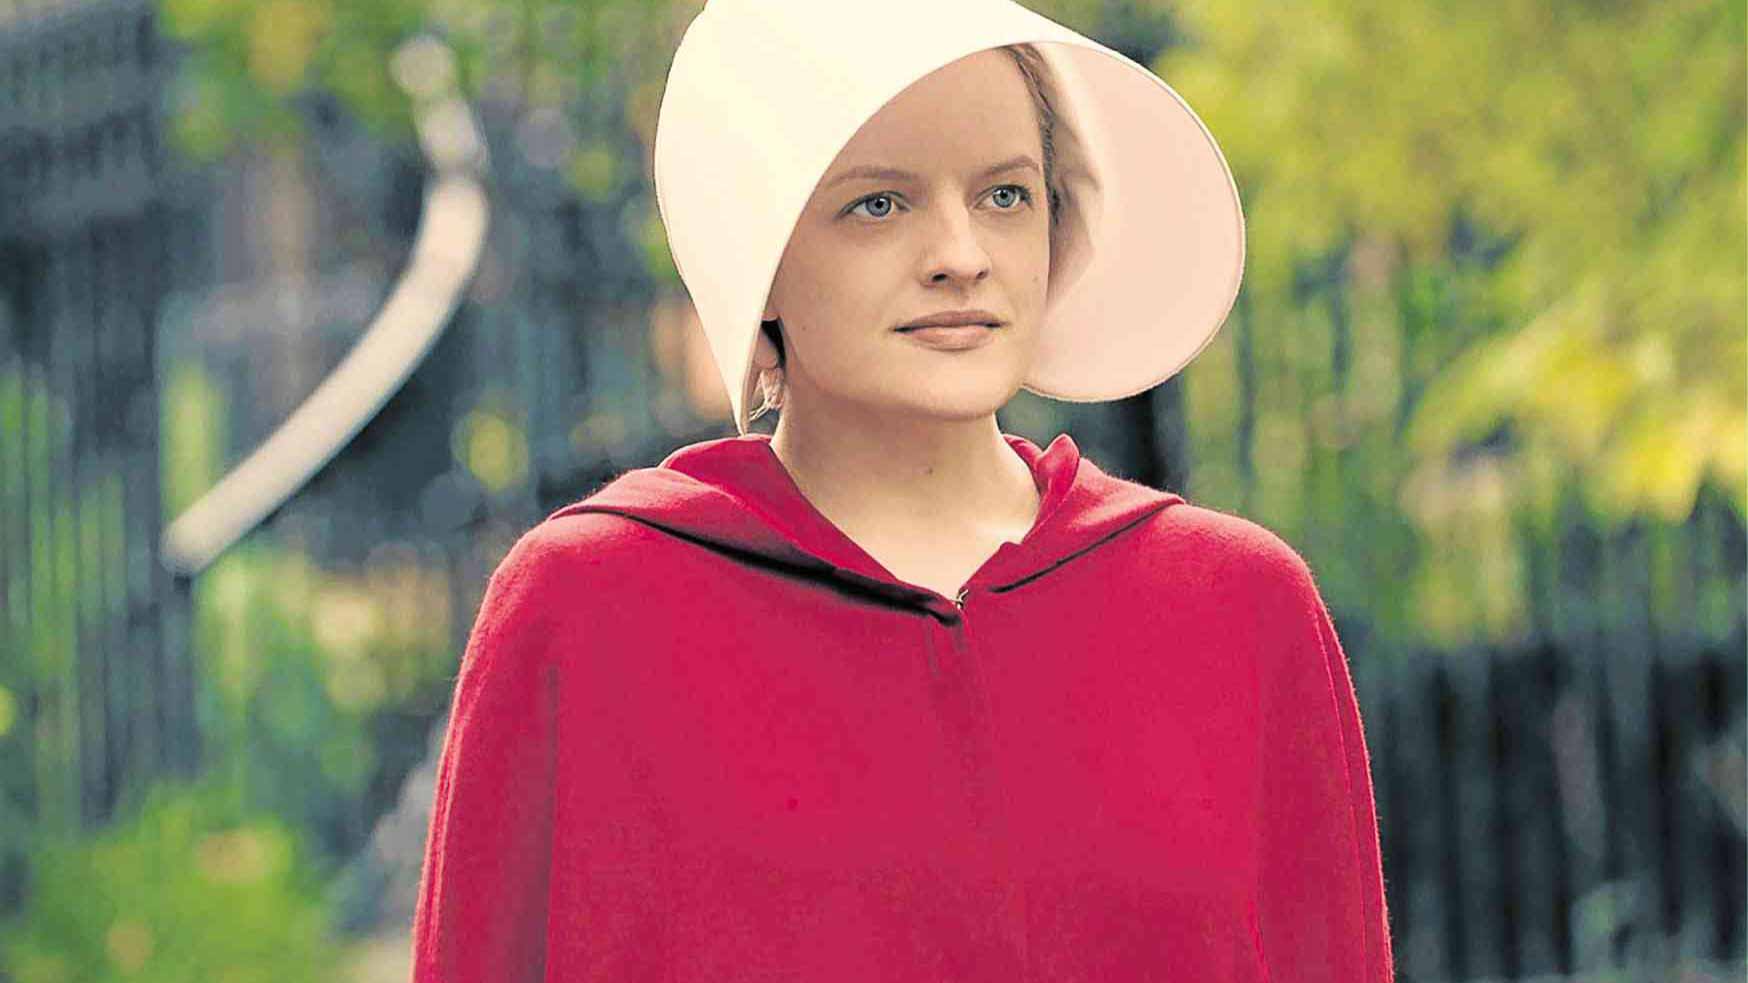 The Handmaid's Tale is an American dystopian drama television series created by Bruce Miller, based on the 1985 nov...